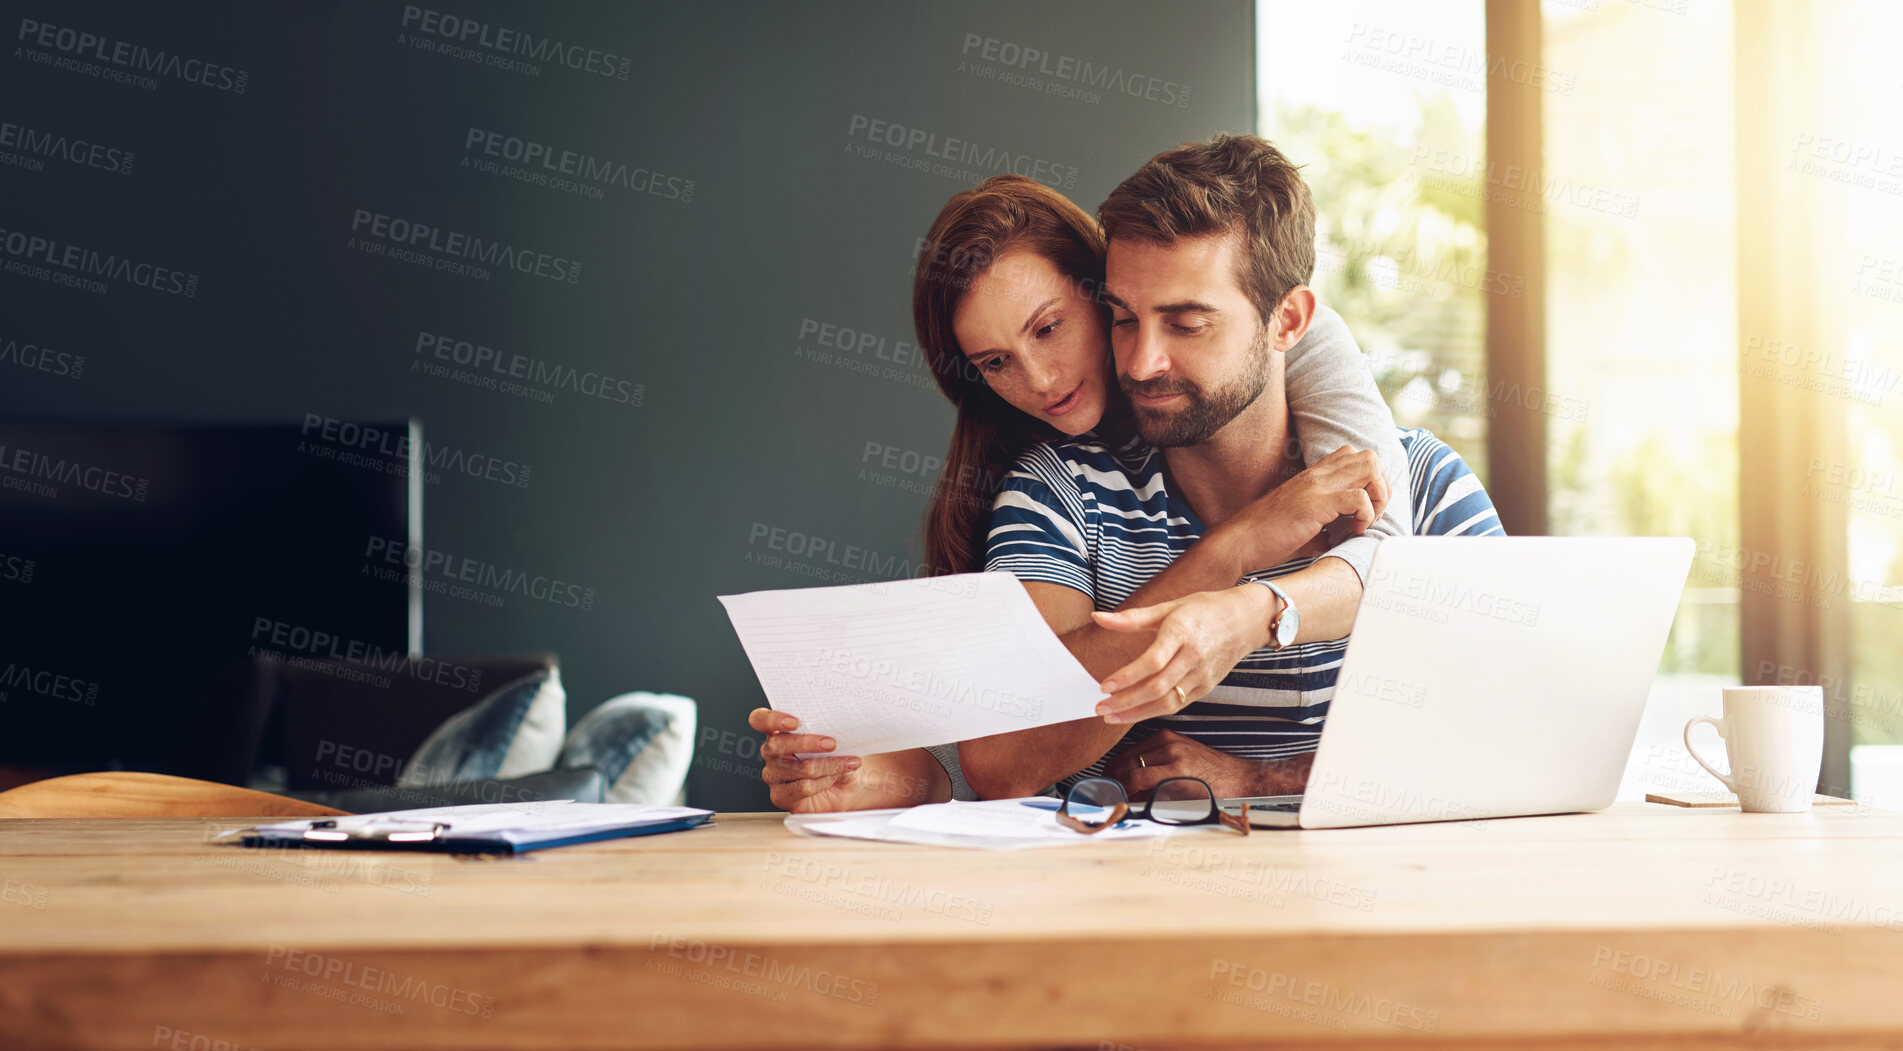 Buy stock photo Cropped shot of an affectionate young couple working on their household budget